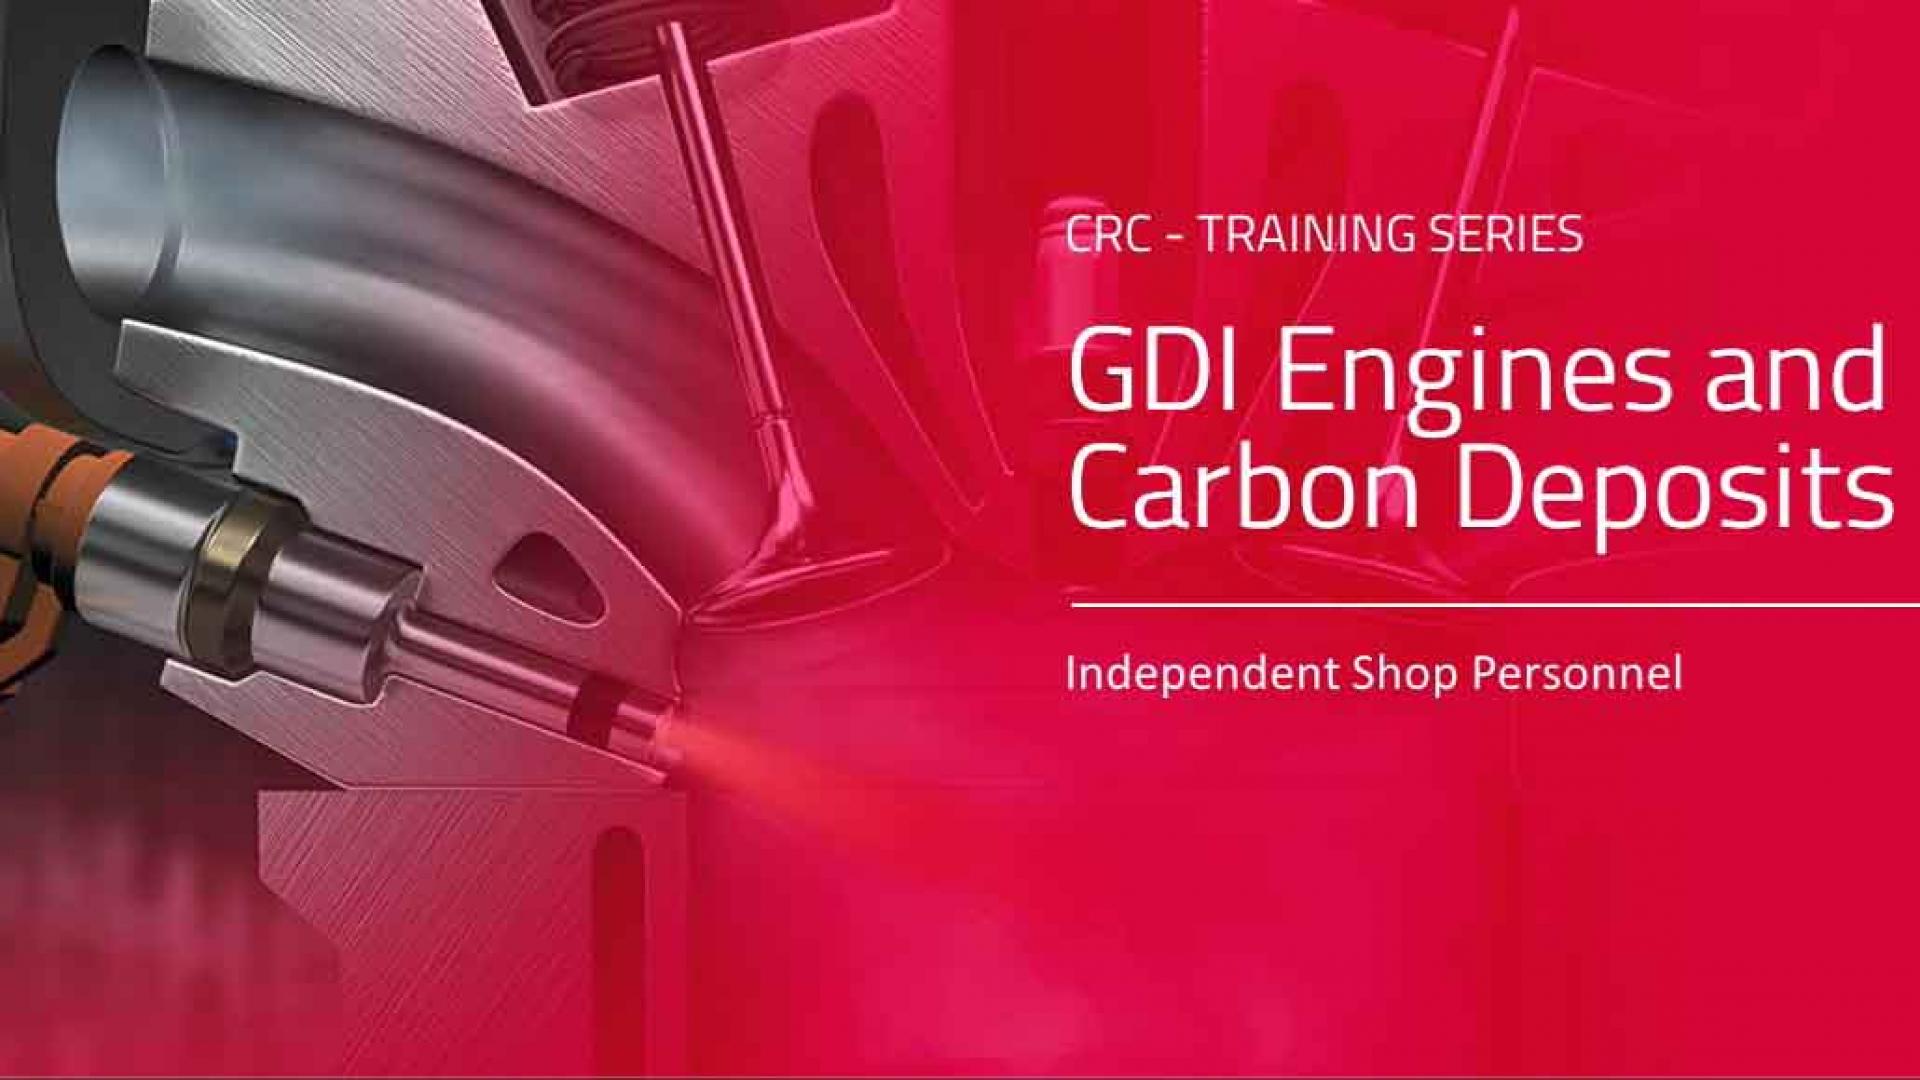 CRC GDI Training Video Tips about GDI engines and how to use GDI IVD® Intake Valve & Turbo Cleaner.  Training about service .